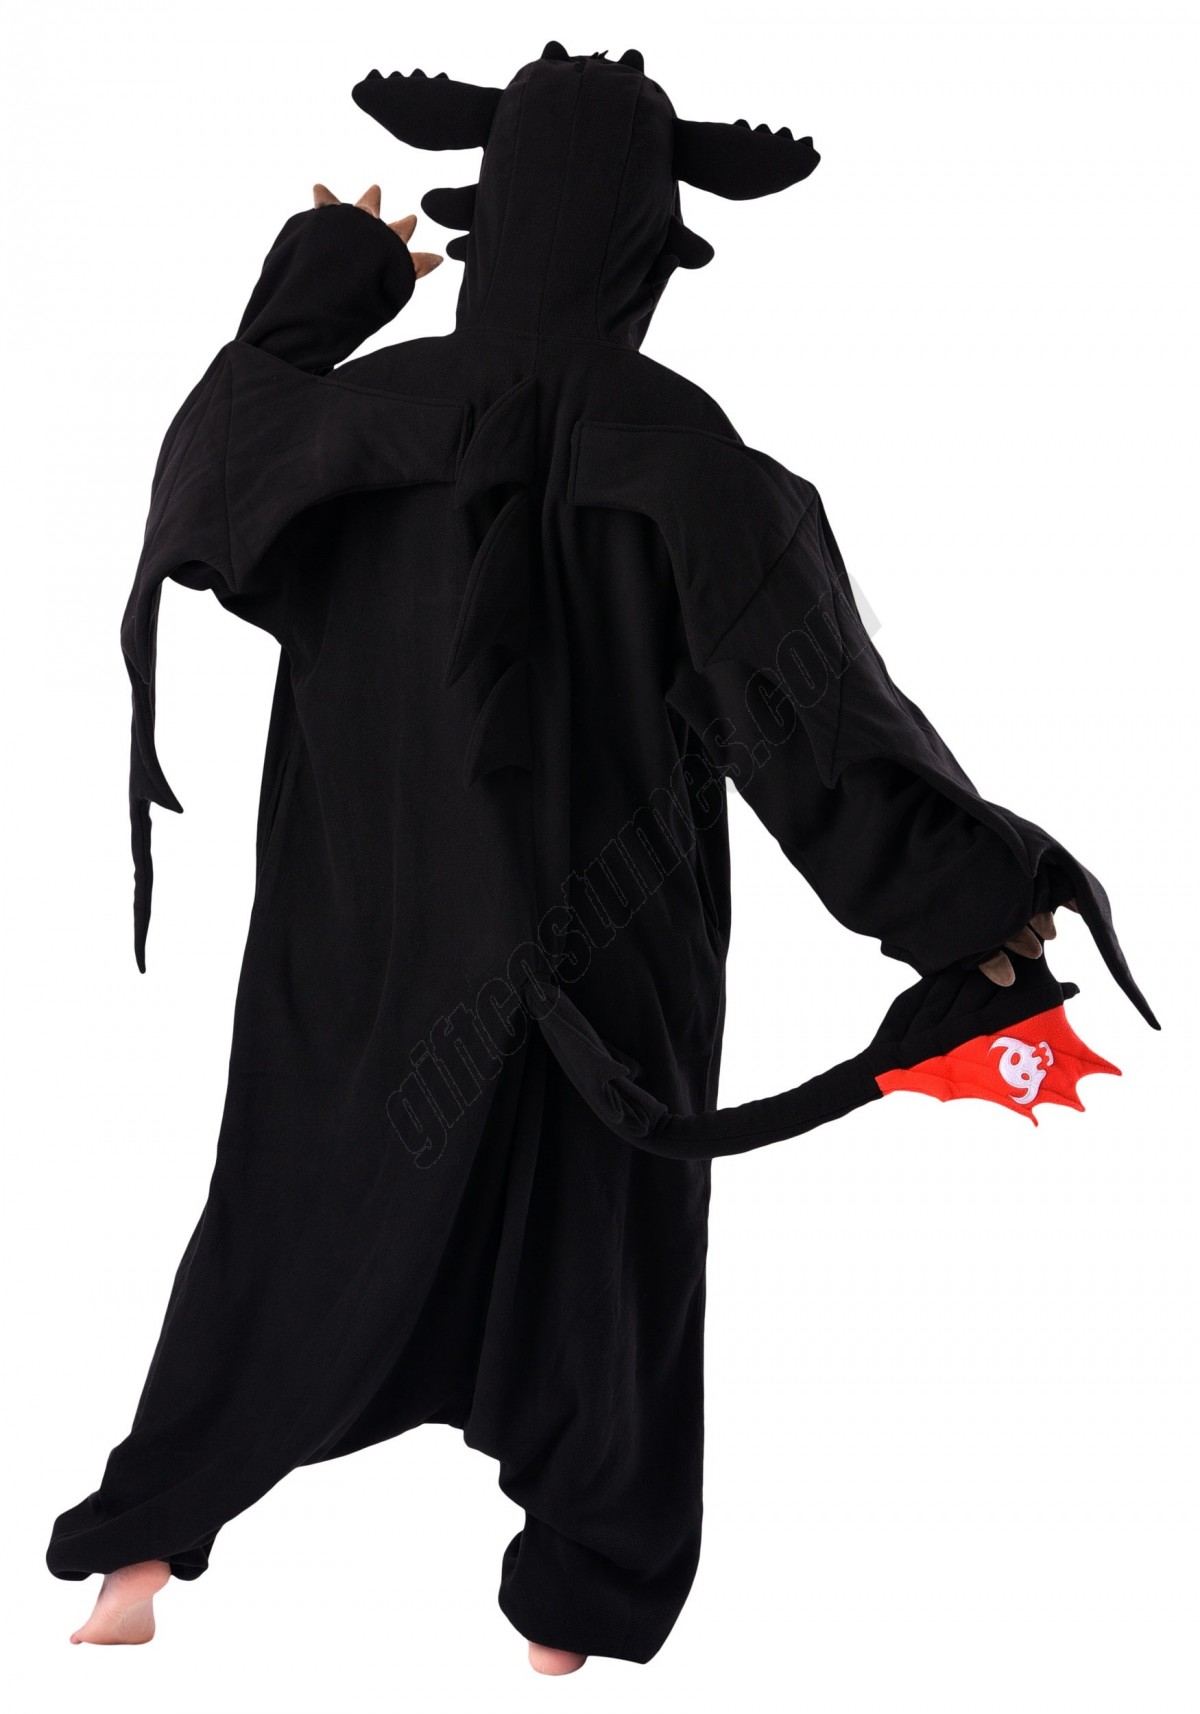 How to Train Your Dragon Toothless Adult Kigurumi Costume - Men's - -1